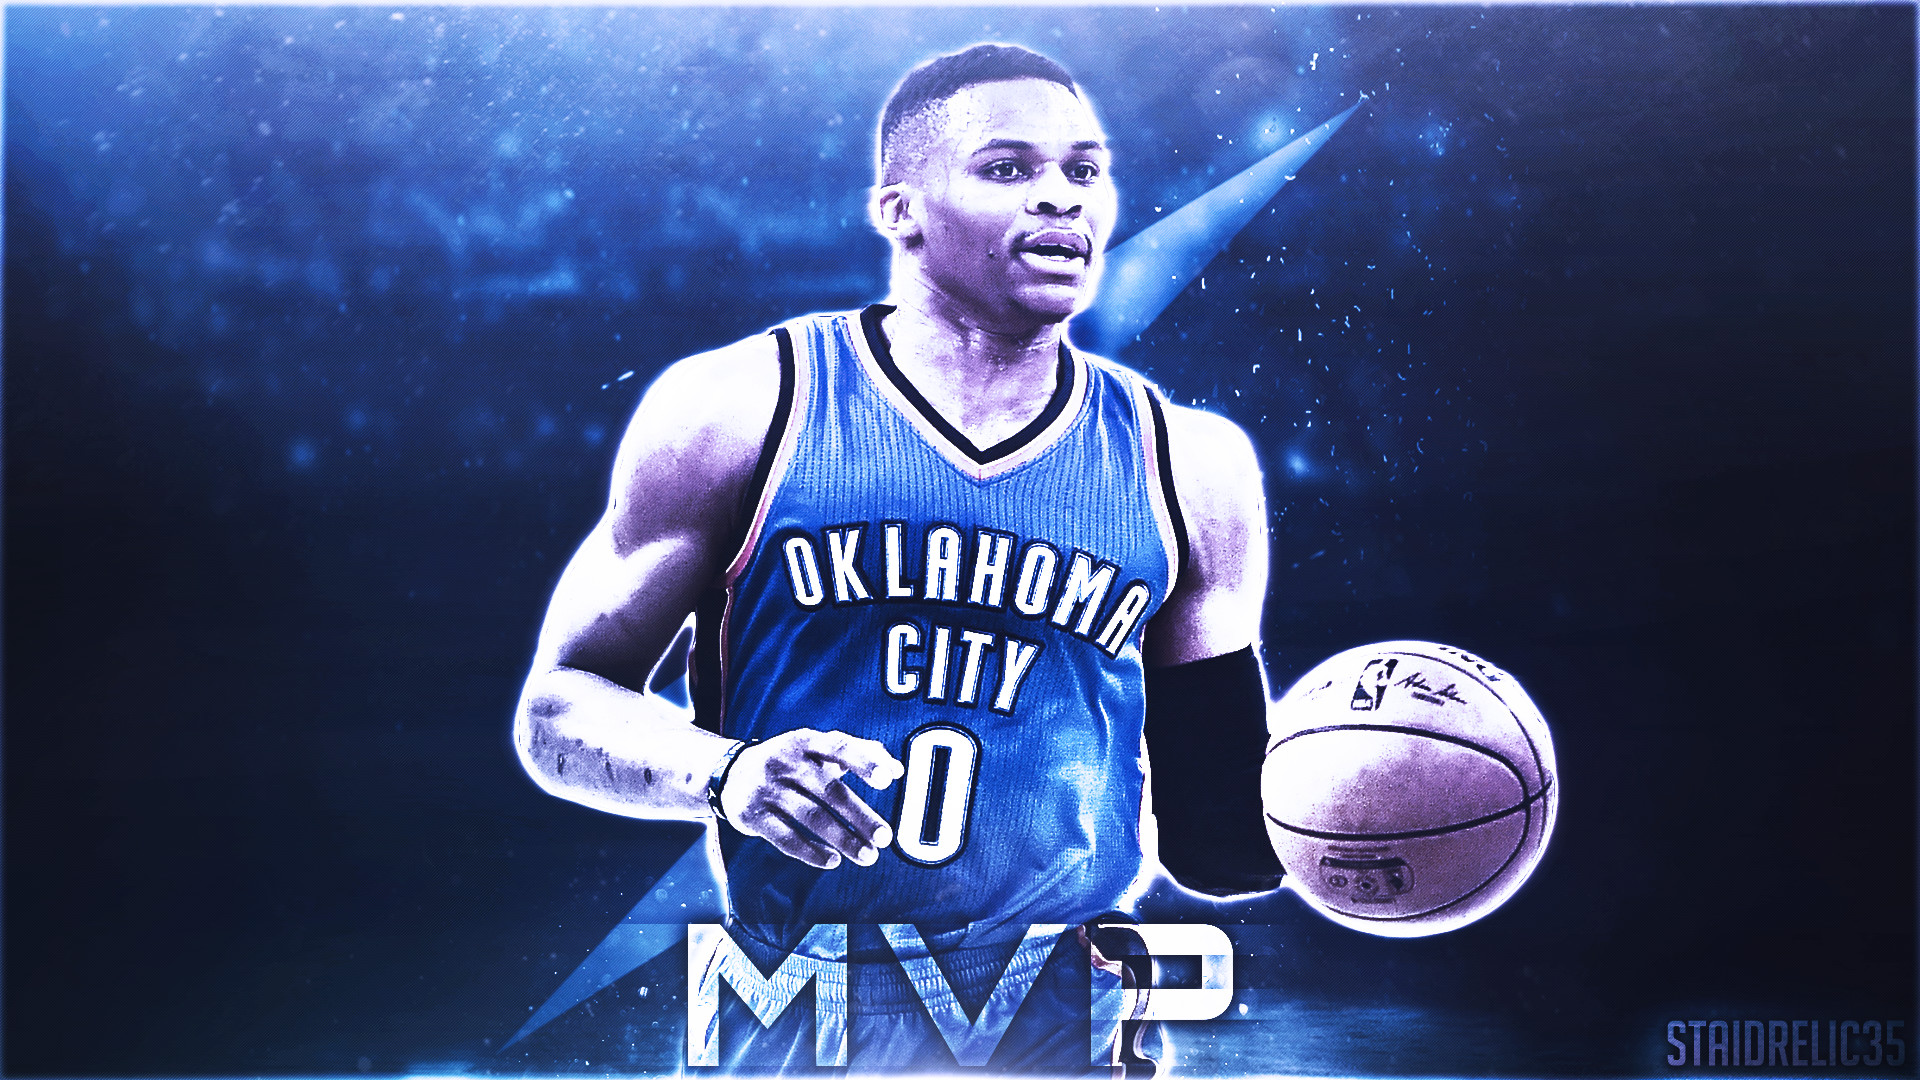 Simple Russell Westbrook "MVP" design I created. What do you guys think?